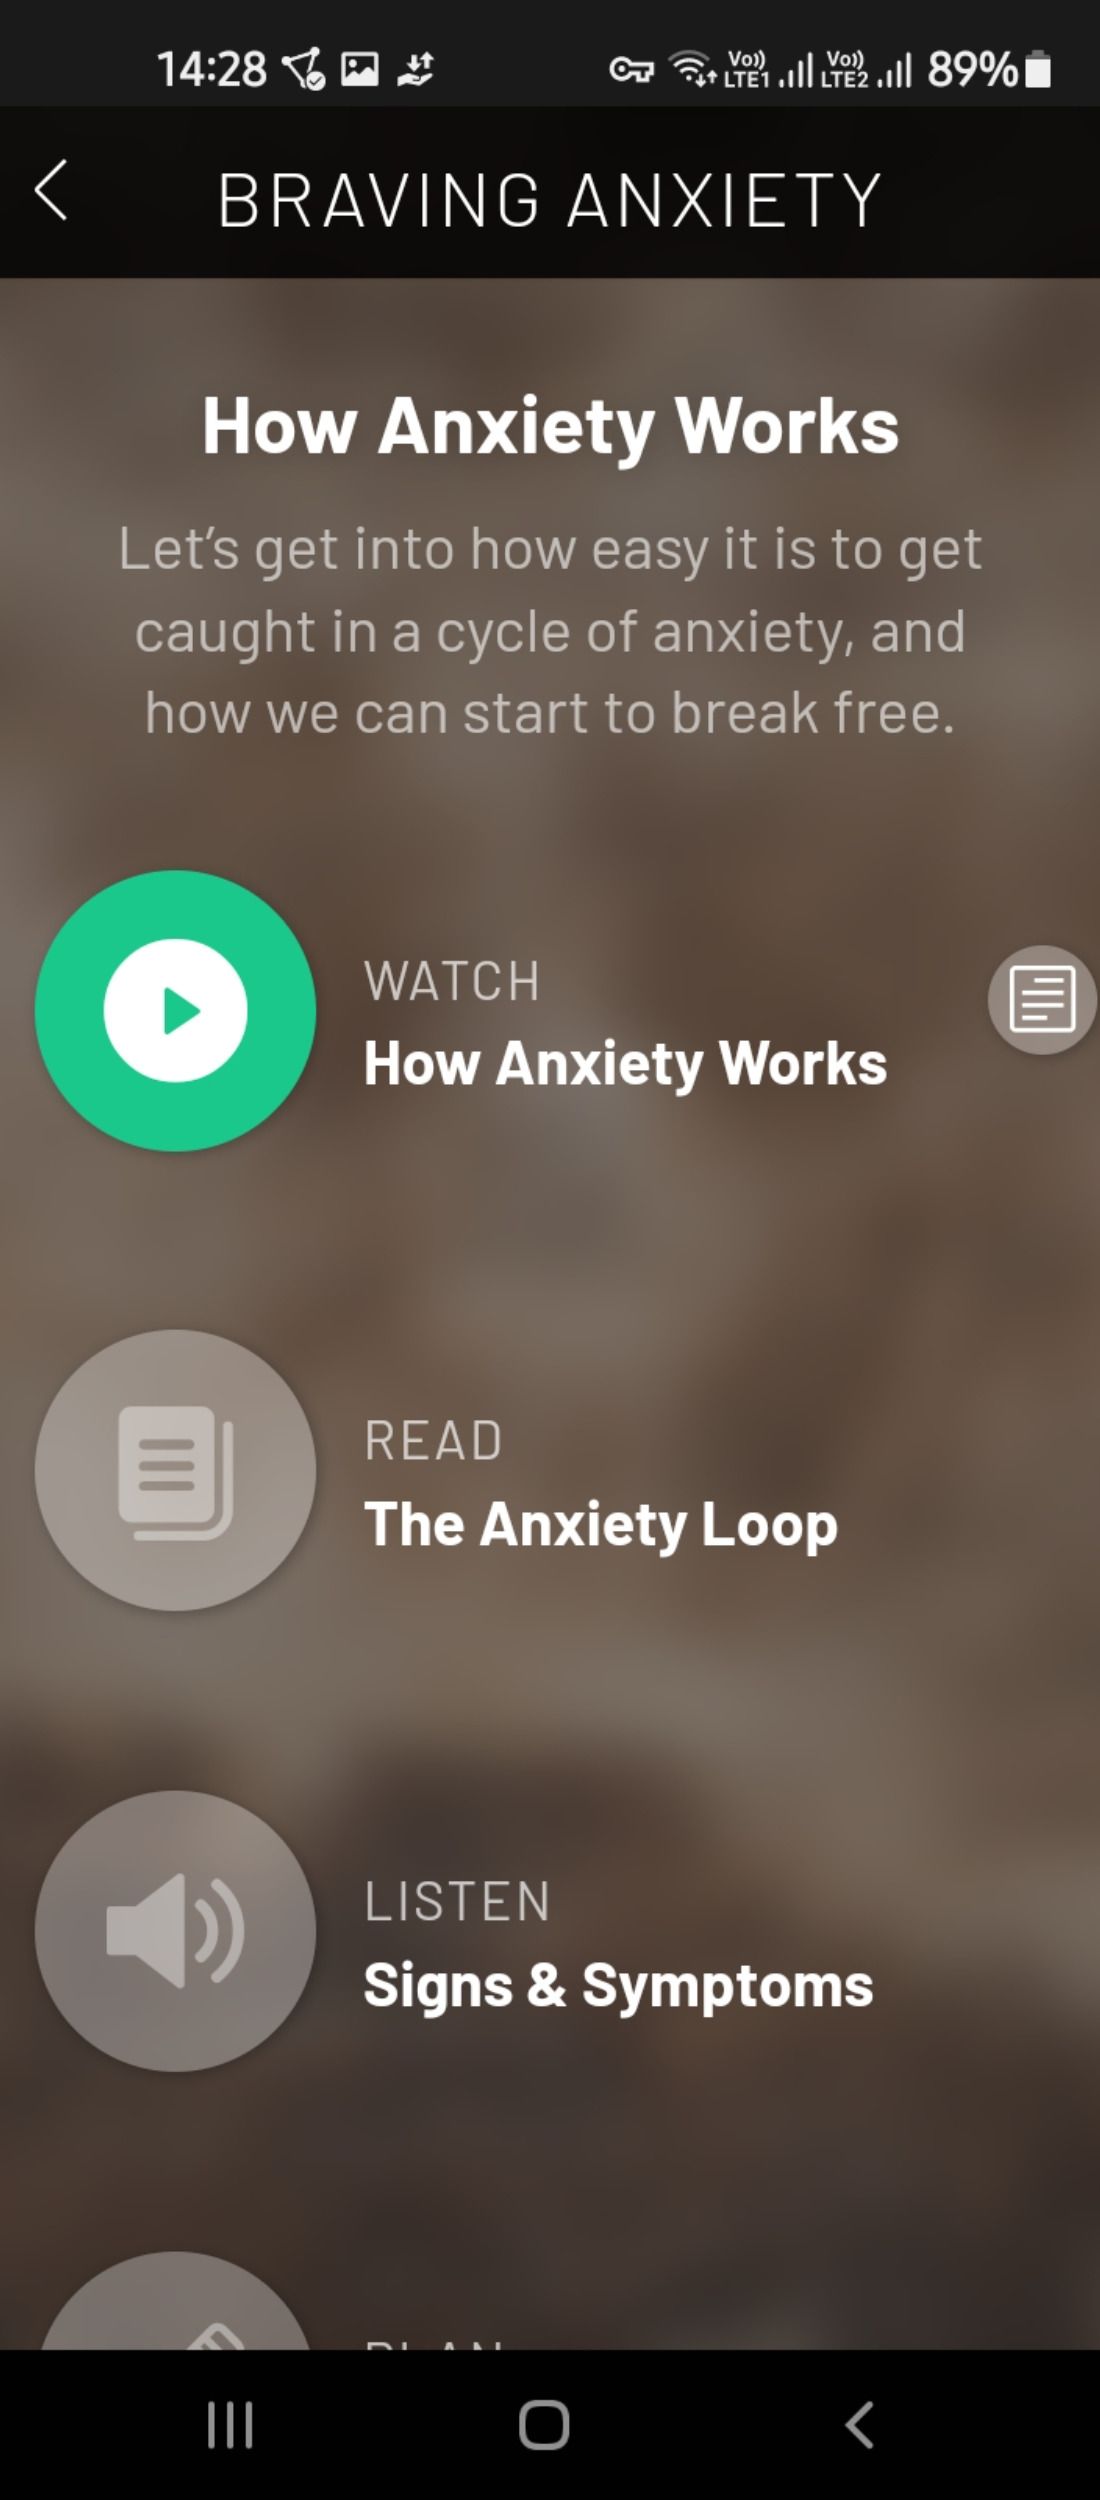 Anxiety education in the Sanvello app